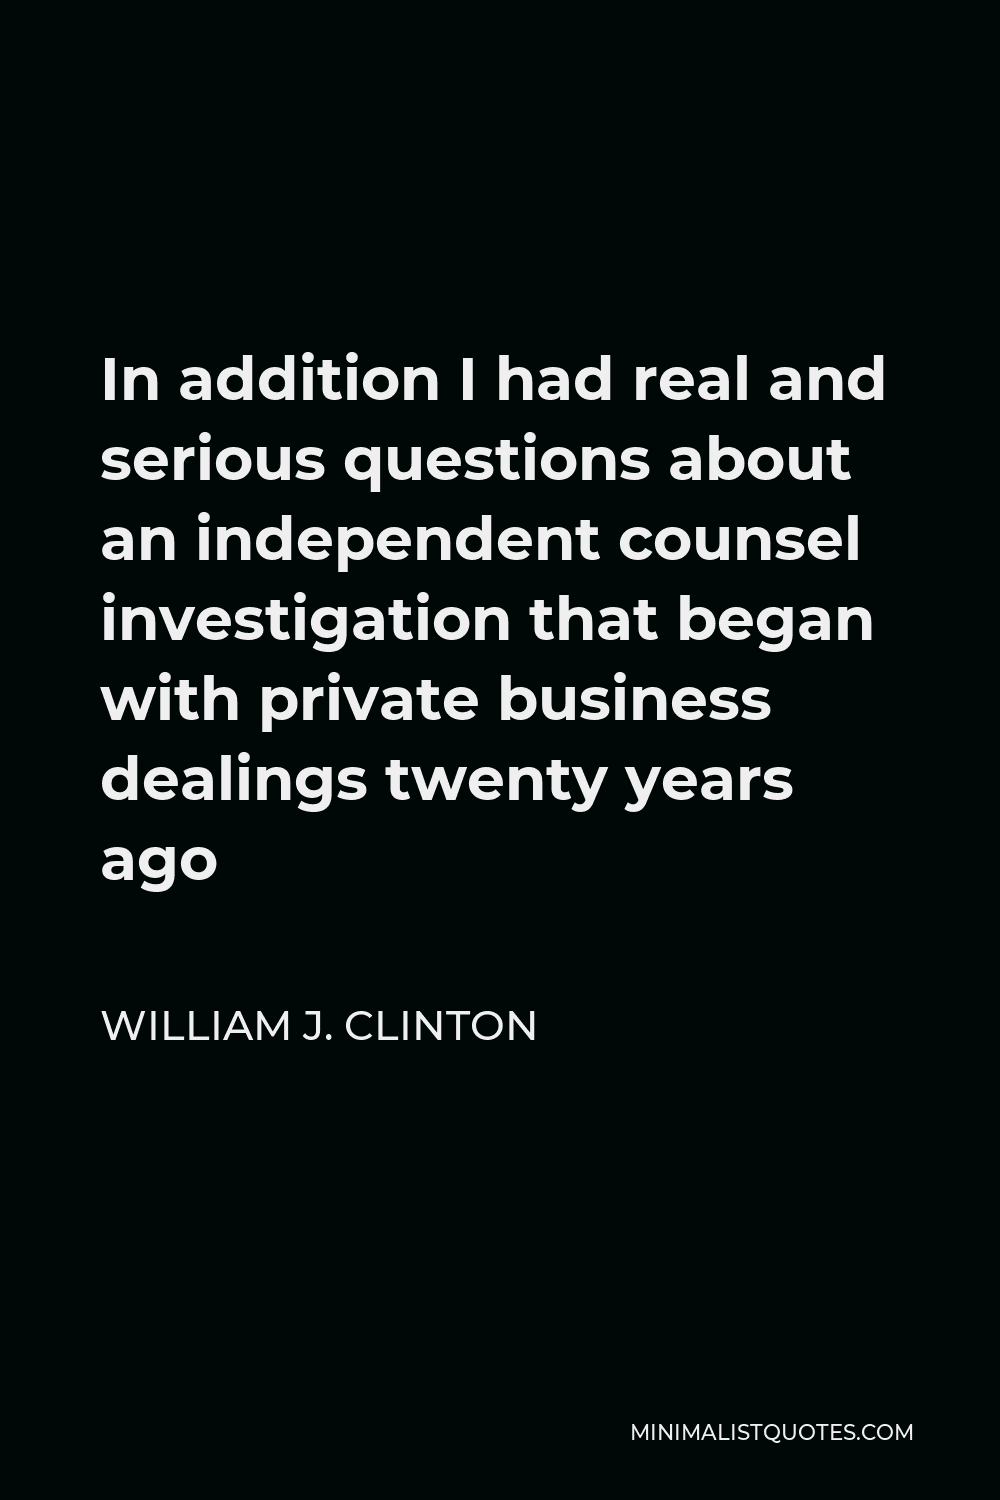 William J. Clinton Quote - In addition I had real and serious questions about an independent counsel investigation that began with private business dealings twenty years ago